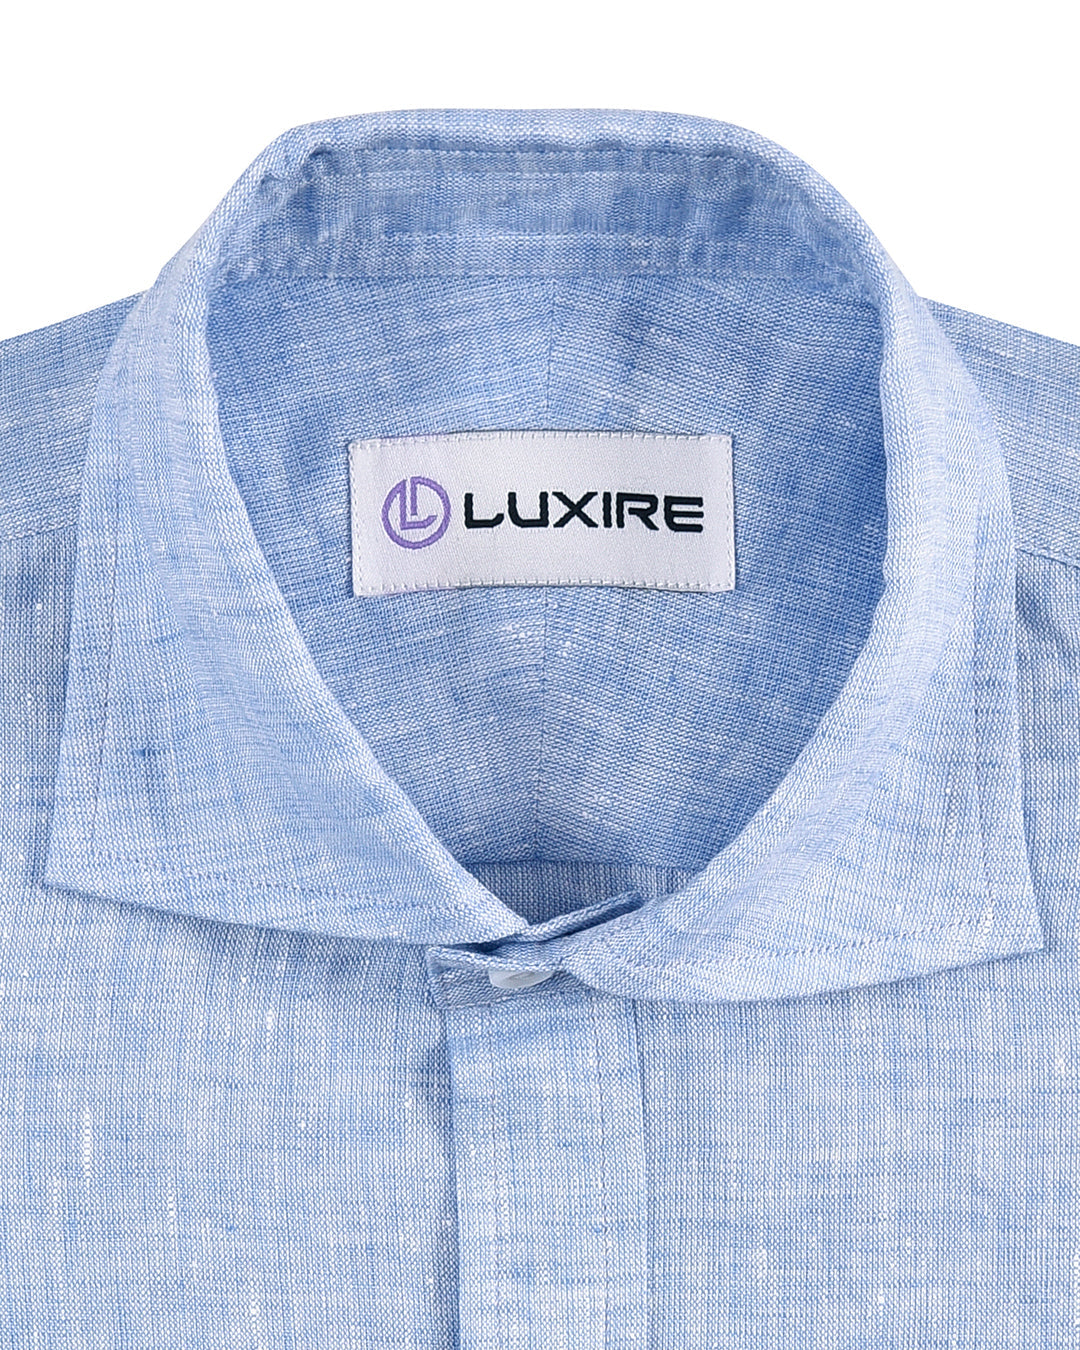 Collar of the custom linen shirt for men in 60s light blue by Luxire Clothing